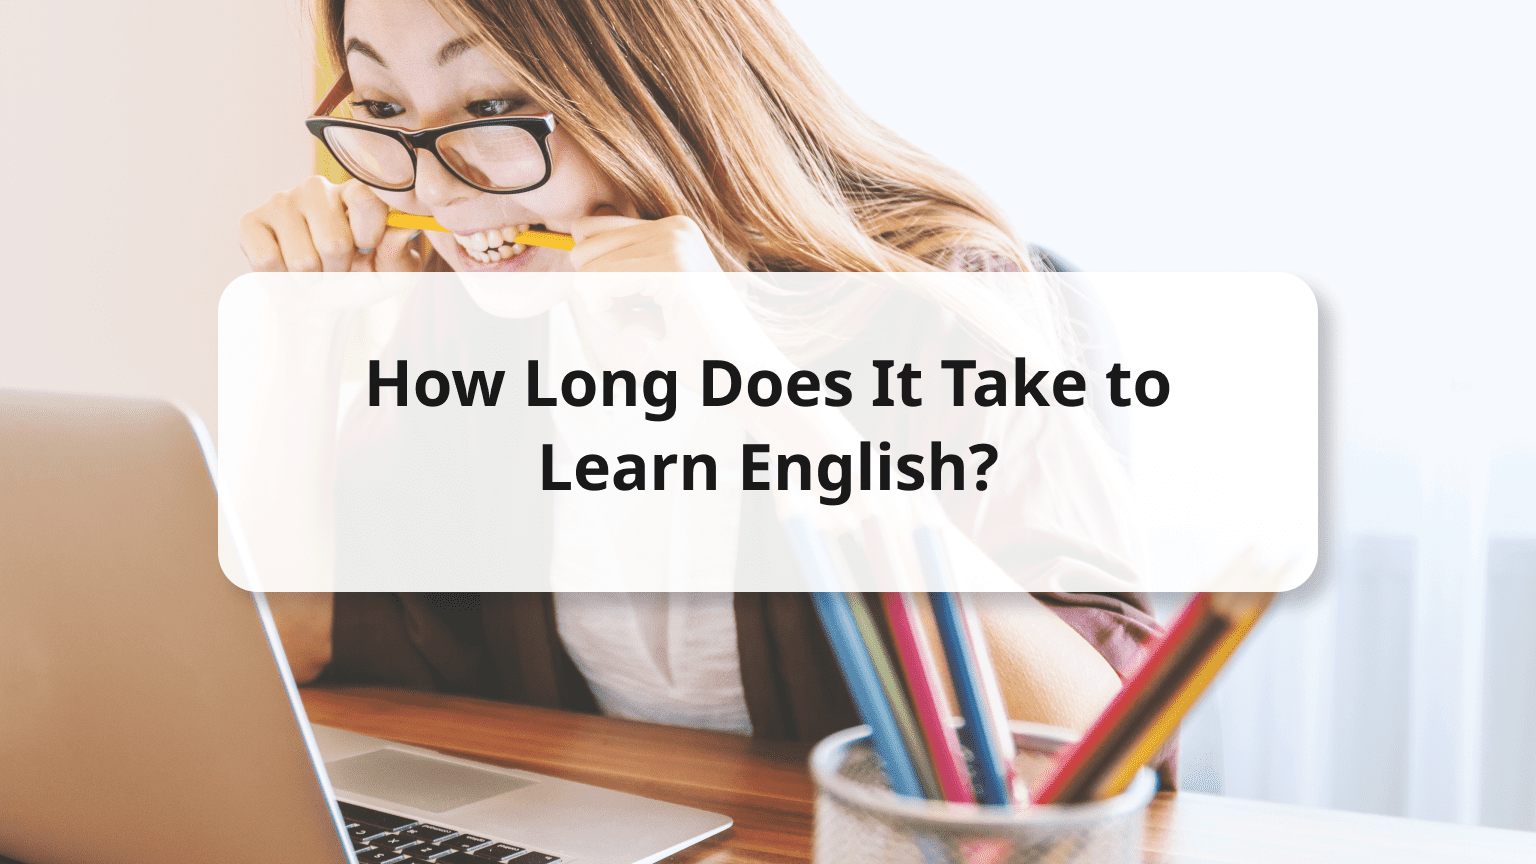 How Long Does It Take To Learn English Scientifically Based Answer